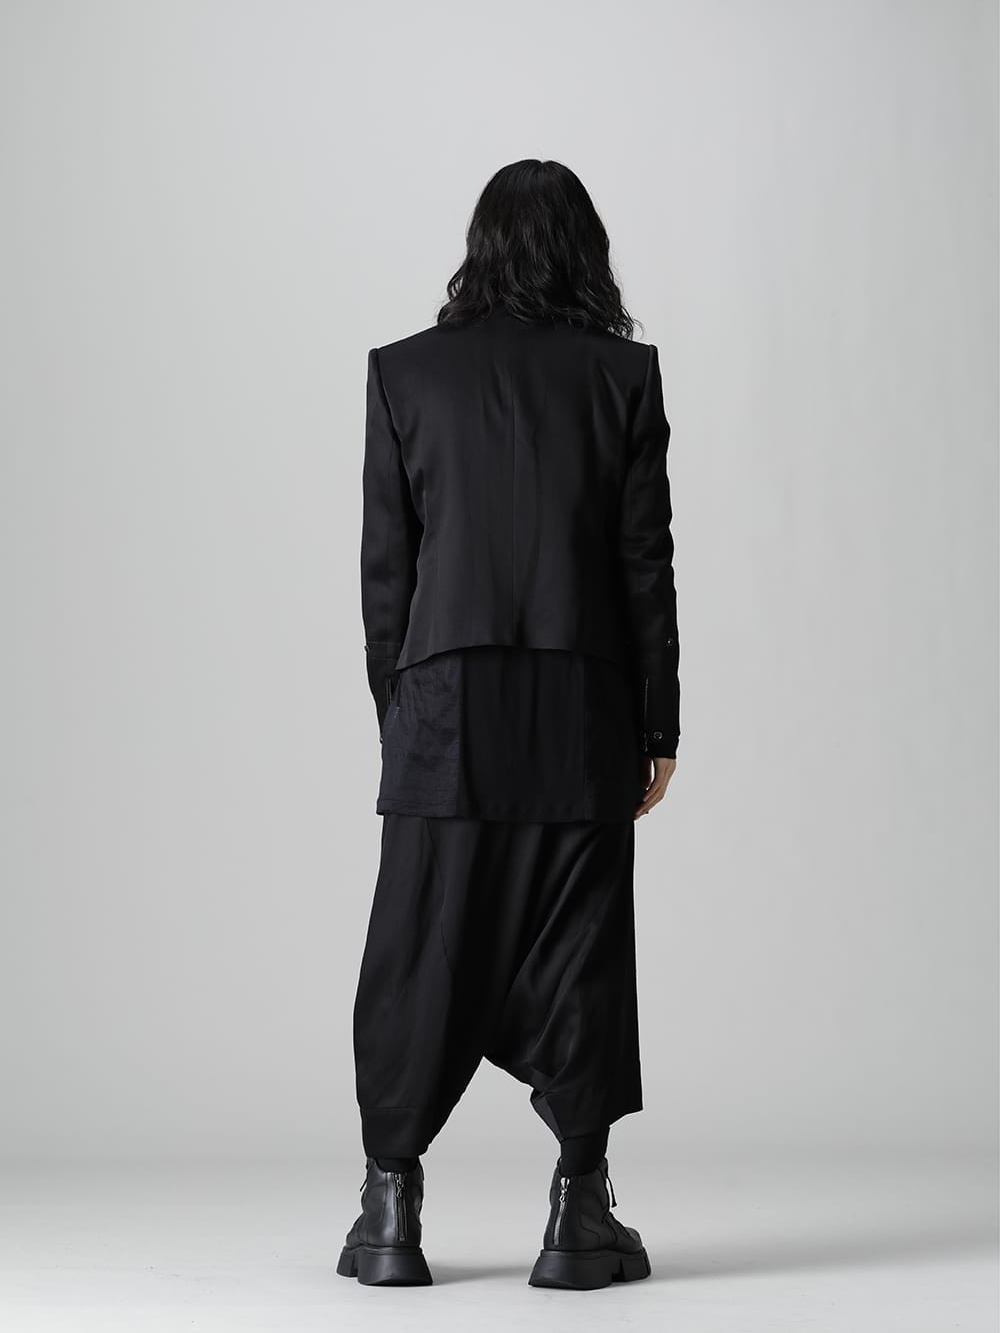 Now in stock is the 5th delivery from the spring/summer collection of JULIUS 2022. Both in-store and online available now - Whole body back This tailored jacket has a unique pattern that creates a texture unique to satin fabric. - 777JAM2-black(Satin jacquard Edge Tailored jacket Black) - 1-003